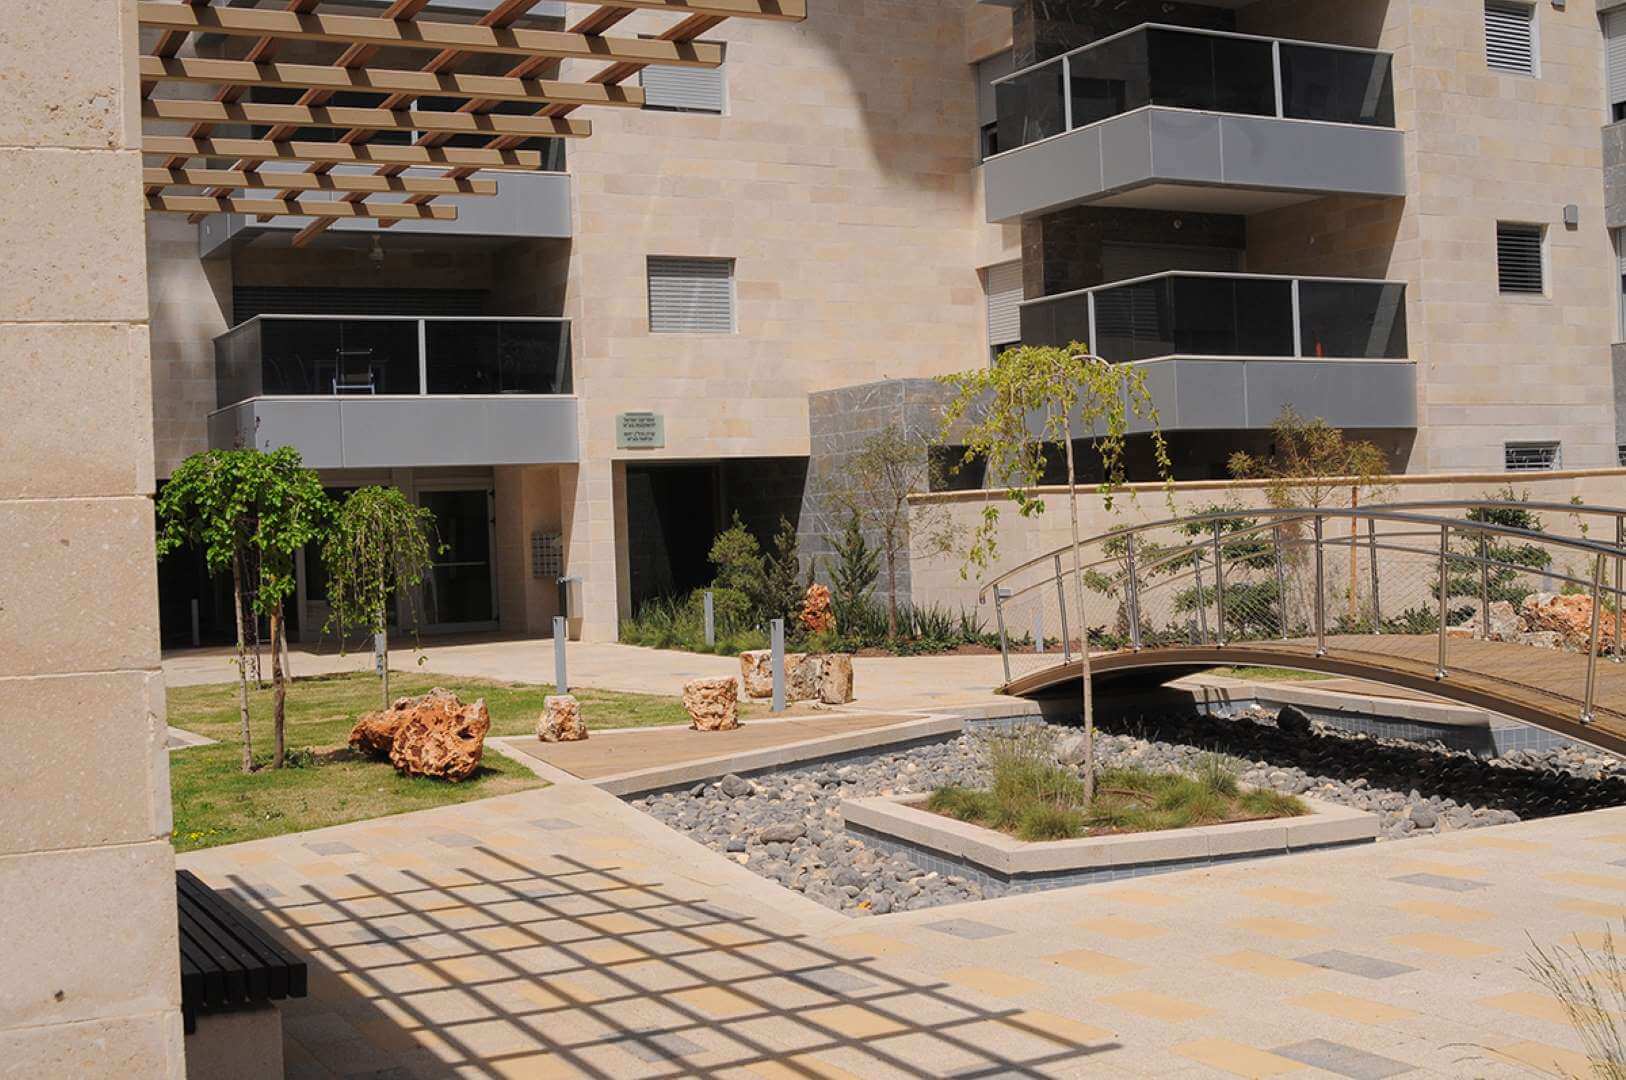 Photograph of a residential building from the NOTAN project in Herzliya